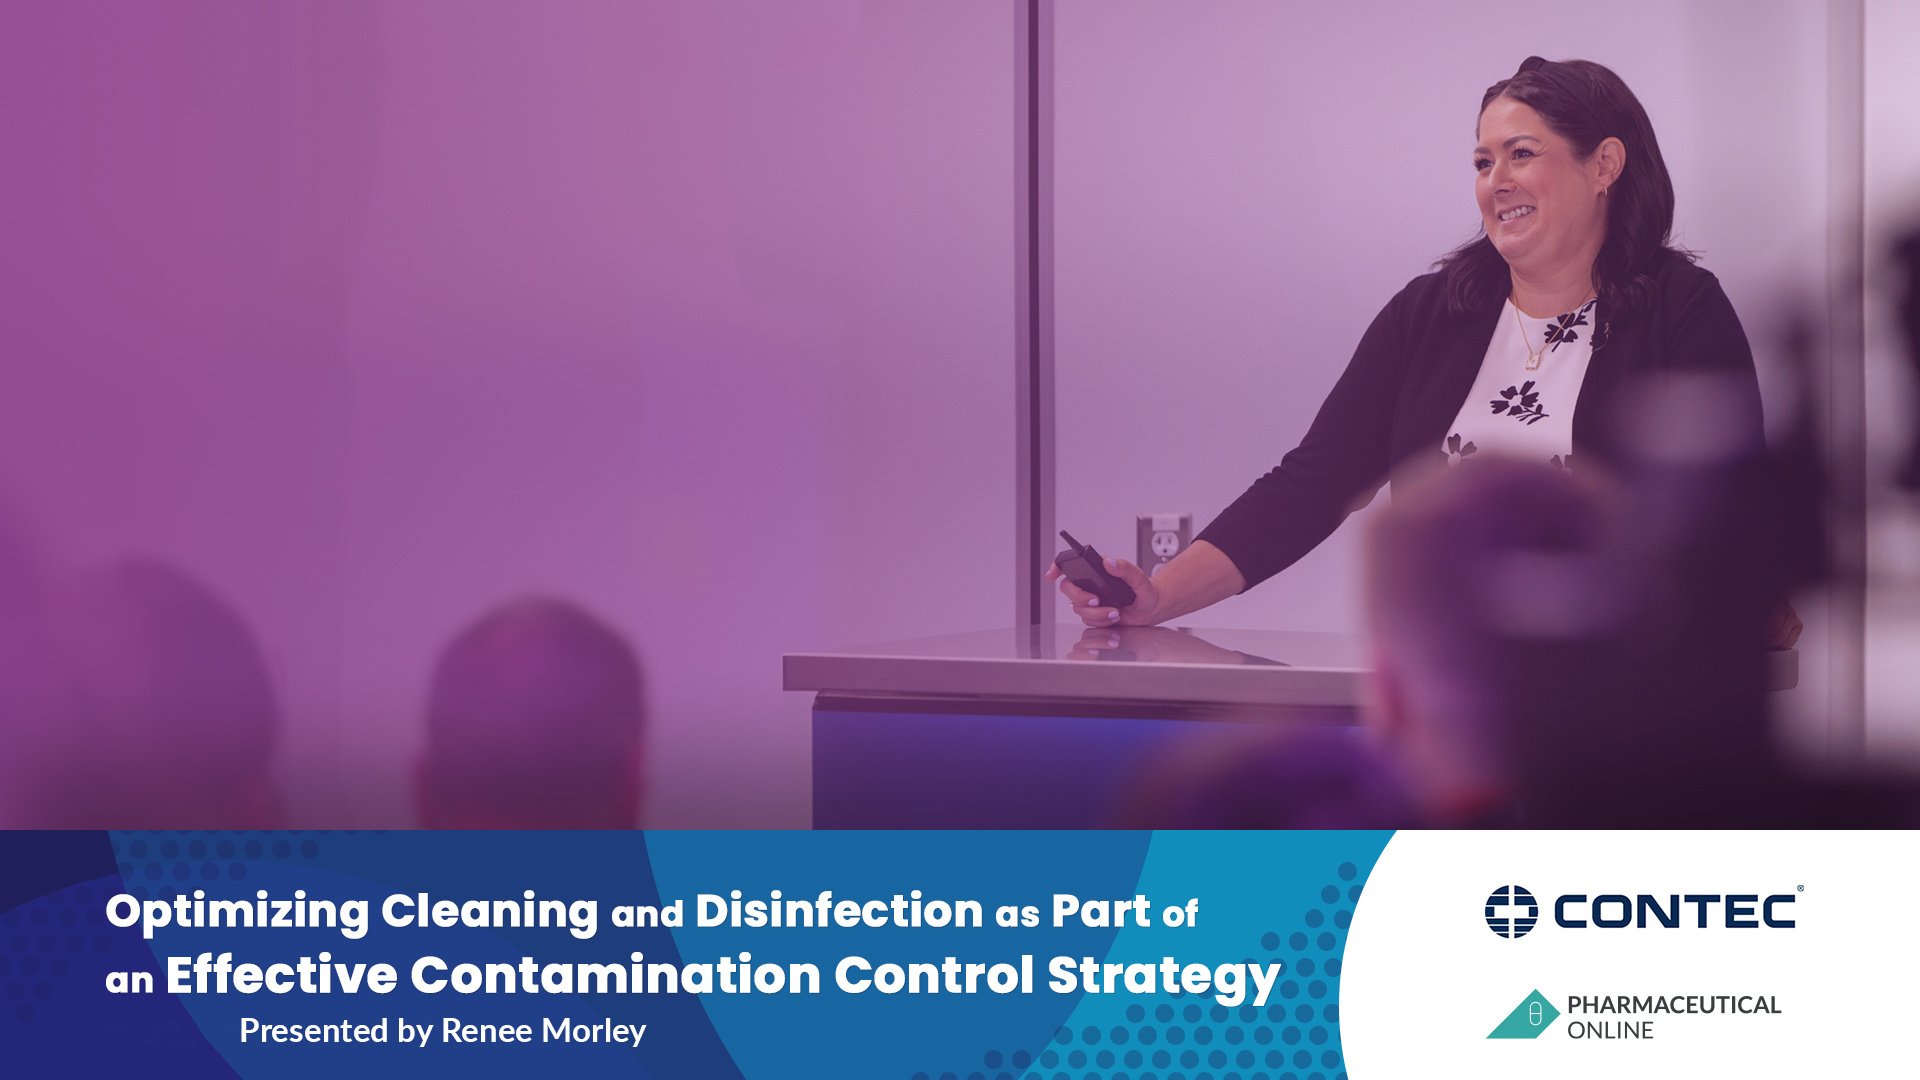 Optimizing Cleaning and Disinfection as Part of an Effective Contamination Control Strategy